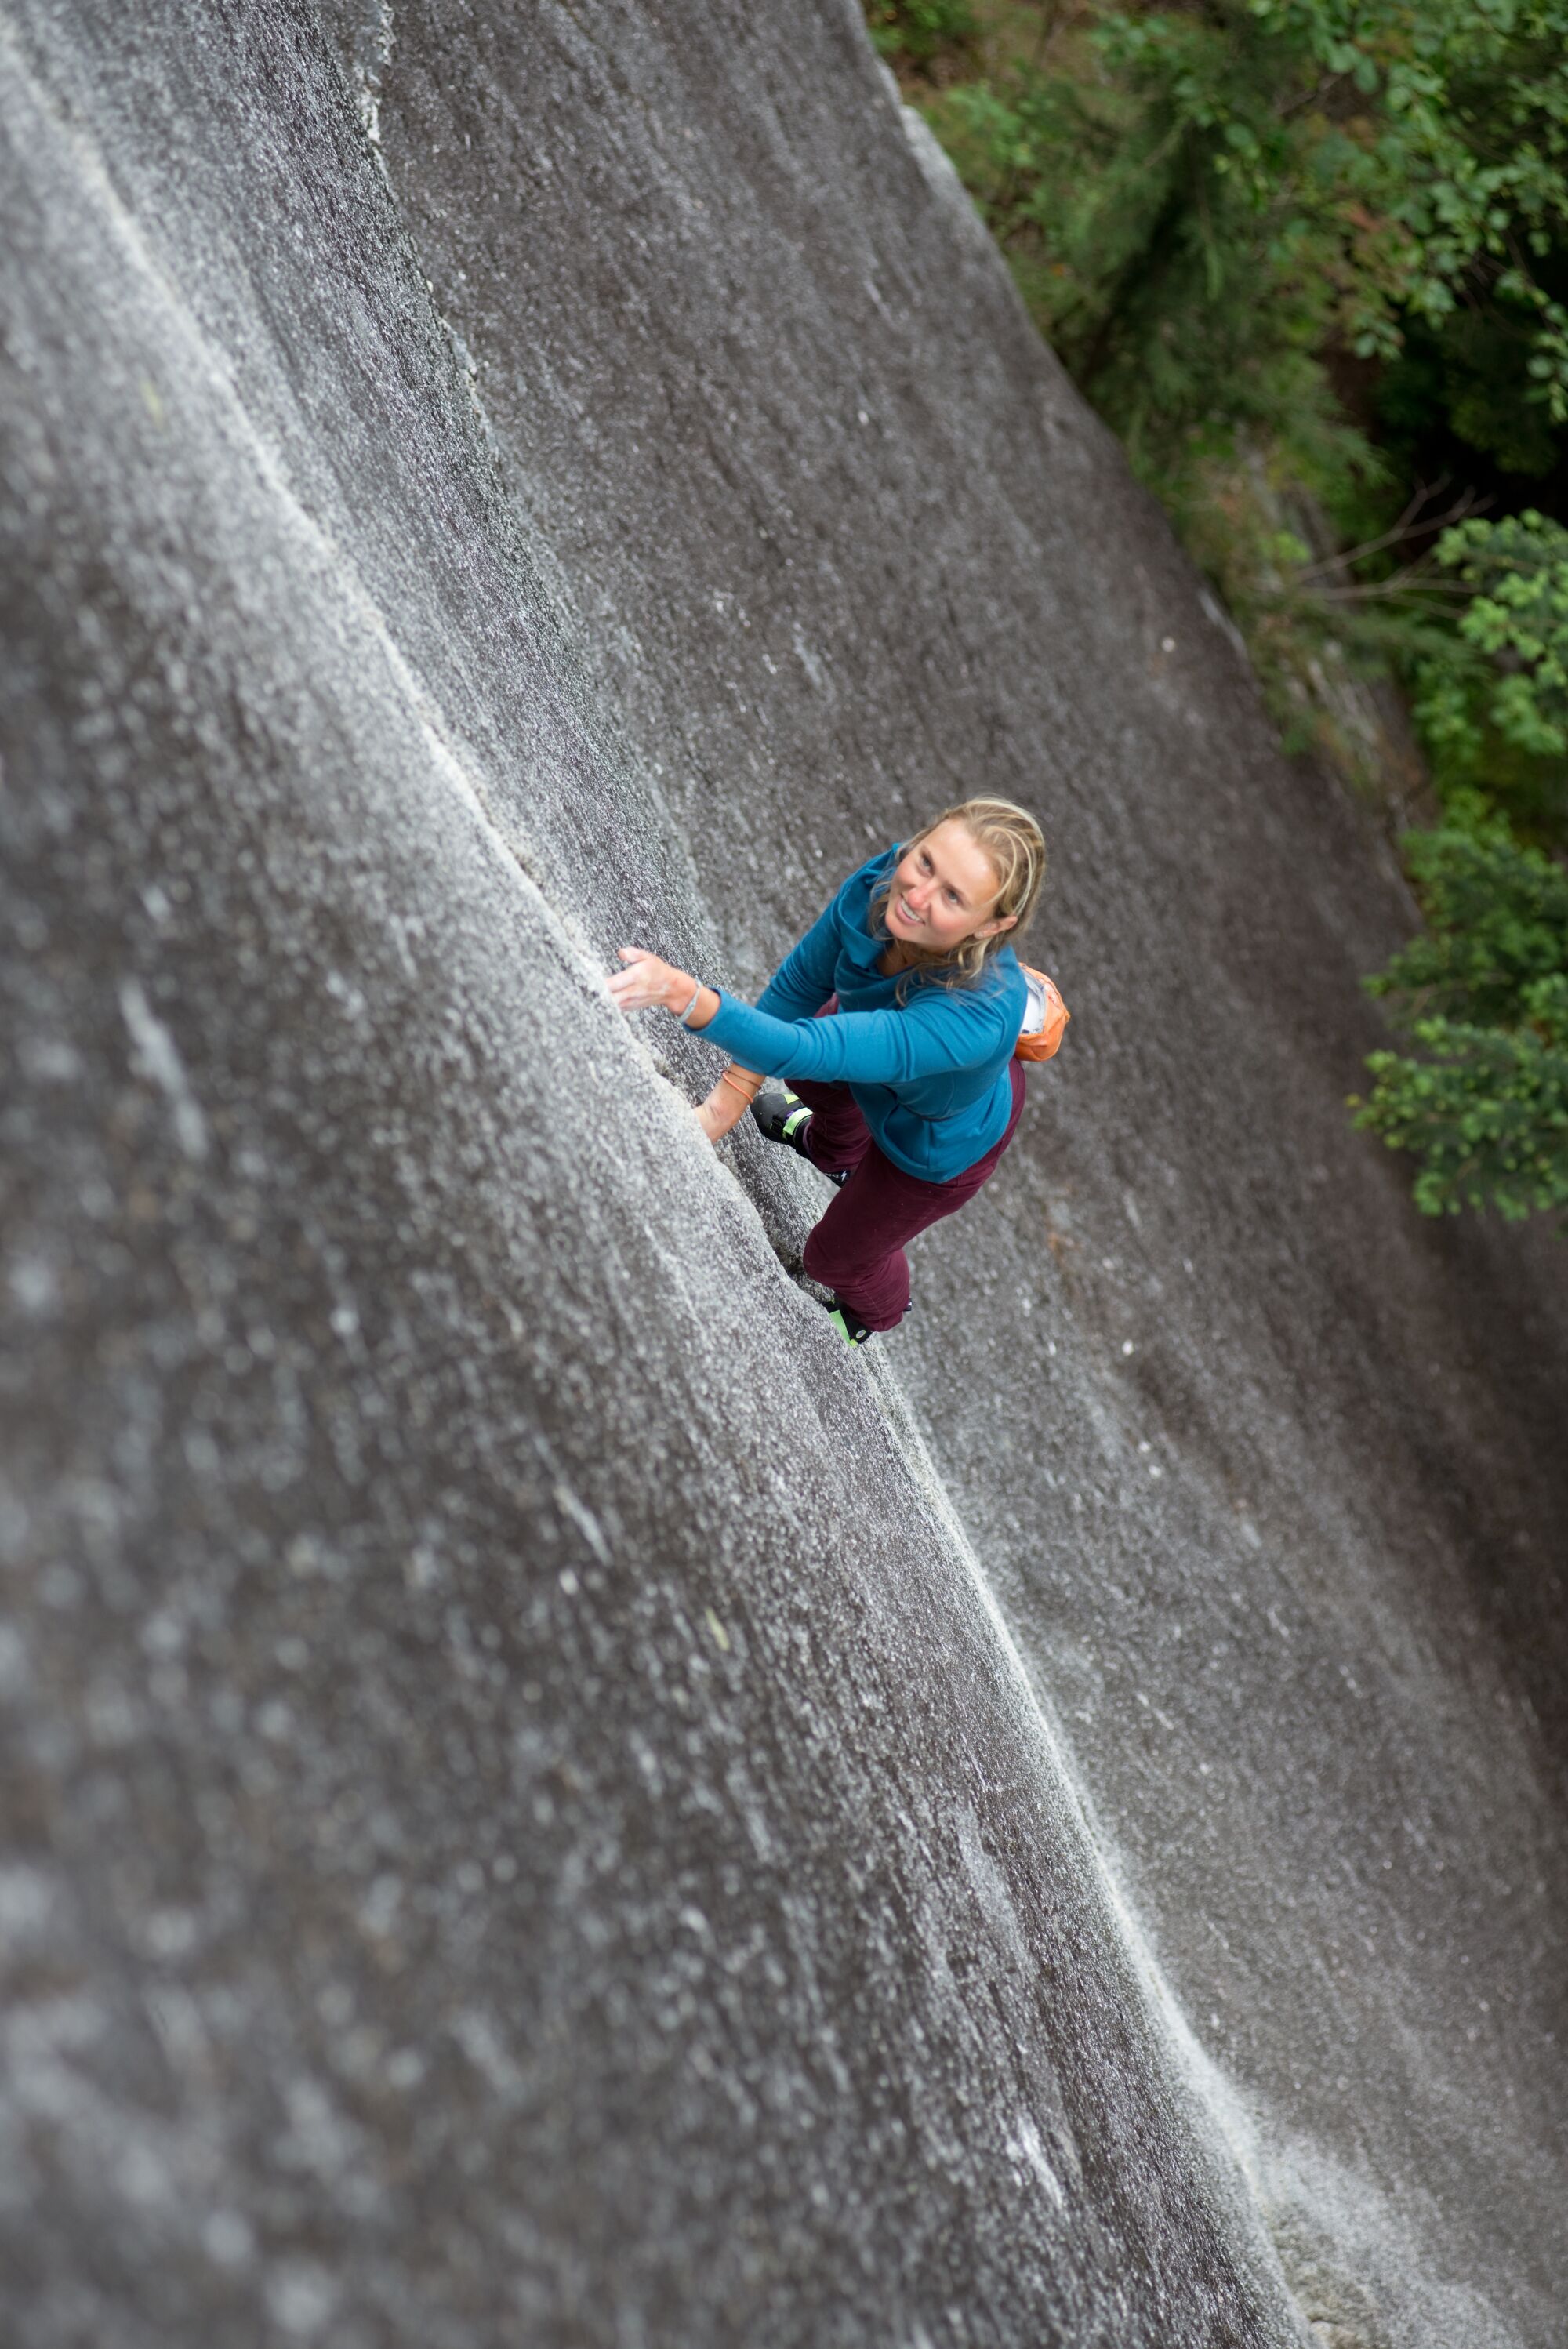 Brette Harrington continues to climb and is now sponsored by North Face.